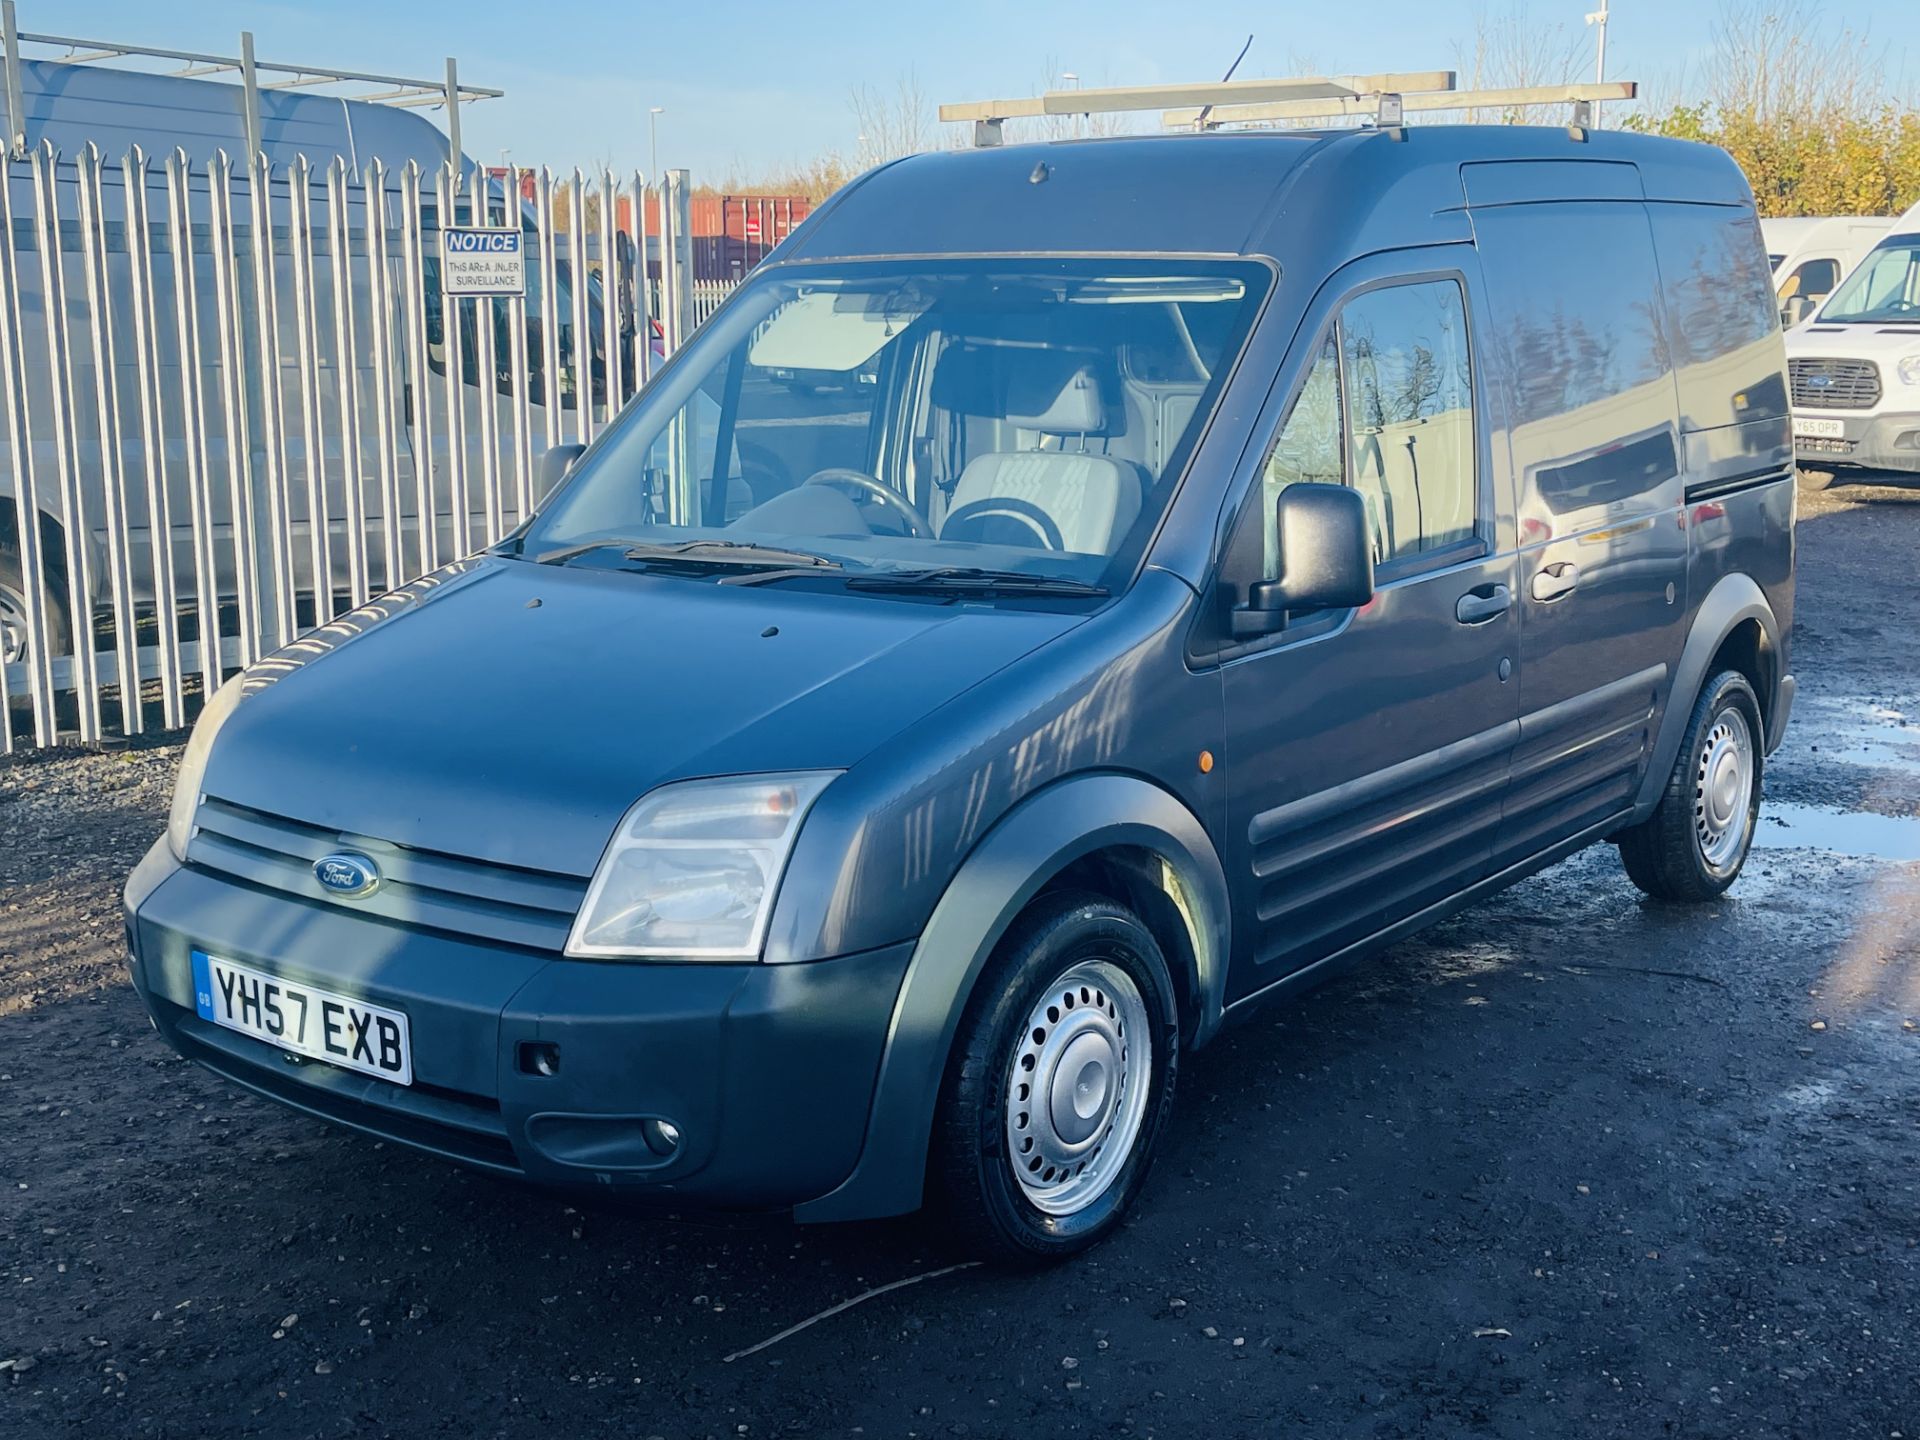 Ford Transit Connect 1.8 TDCI T230 LX110 LWB High Roof 2007 '57 Reg' A/C - No vat save 20% - Image 5 of 20